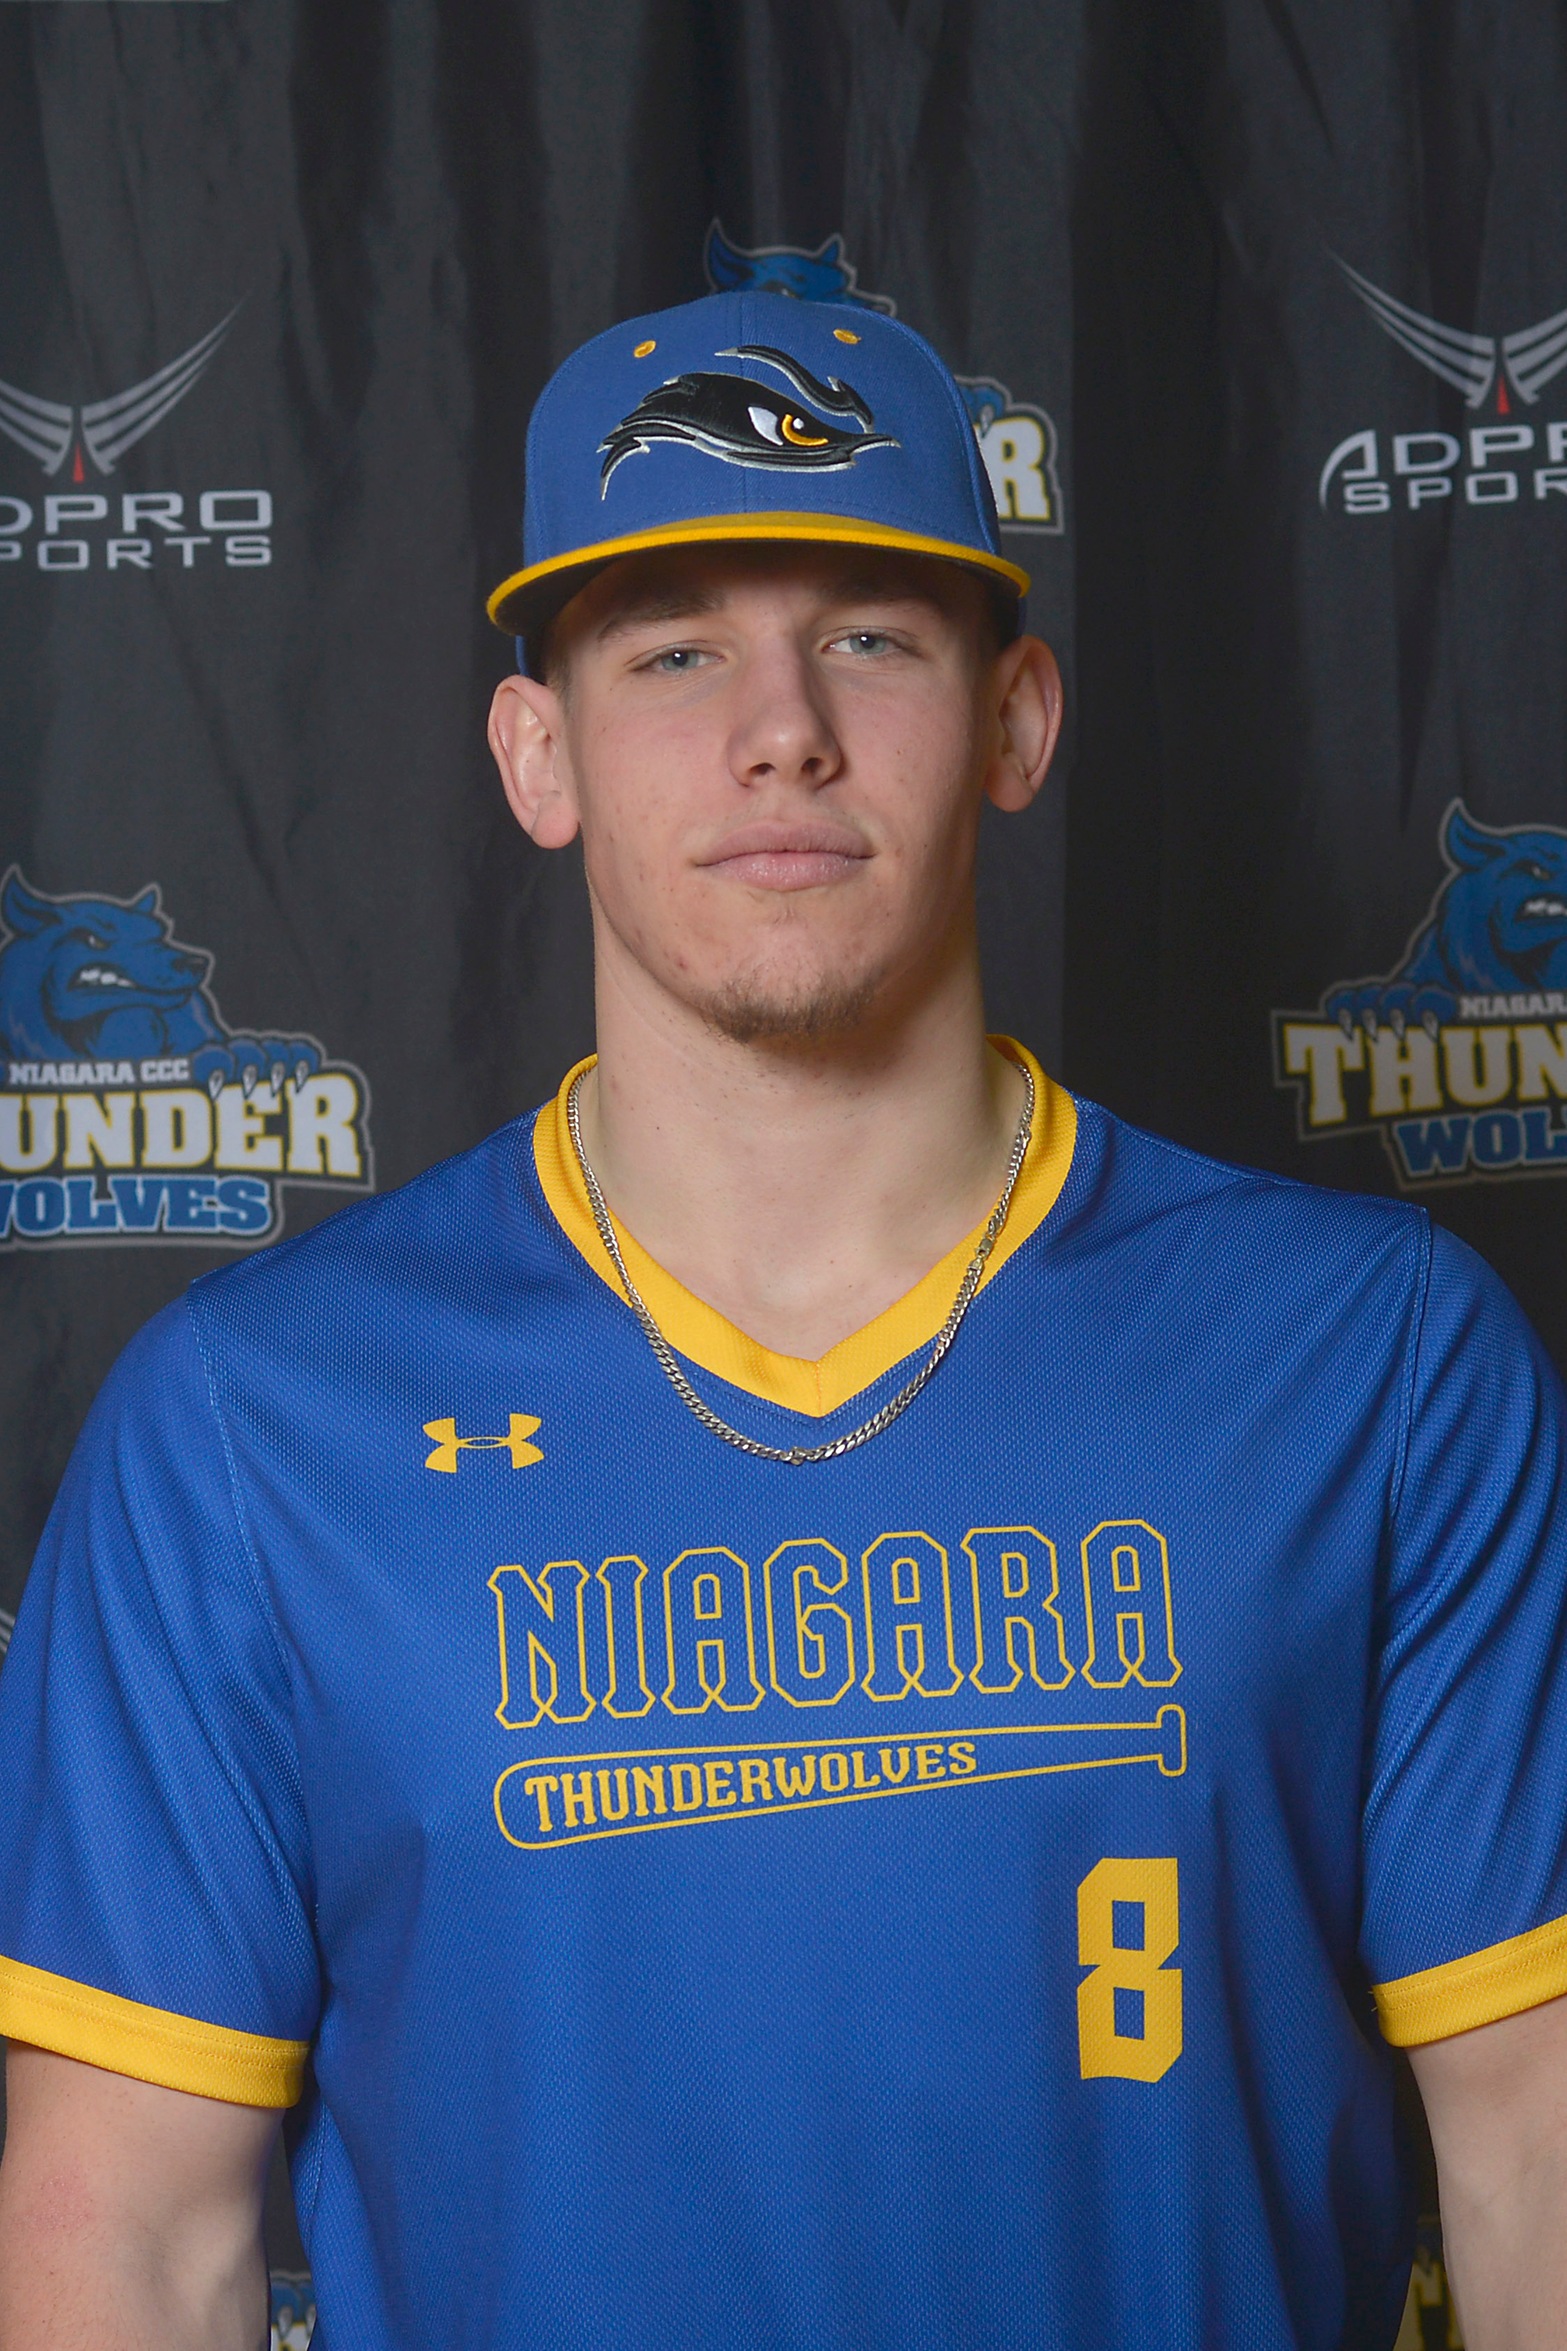 NCCC falls to Generals in extra innings